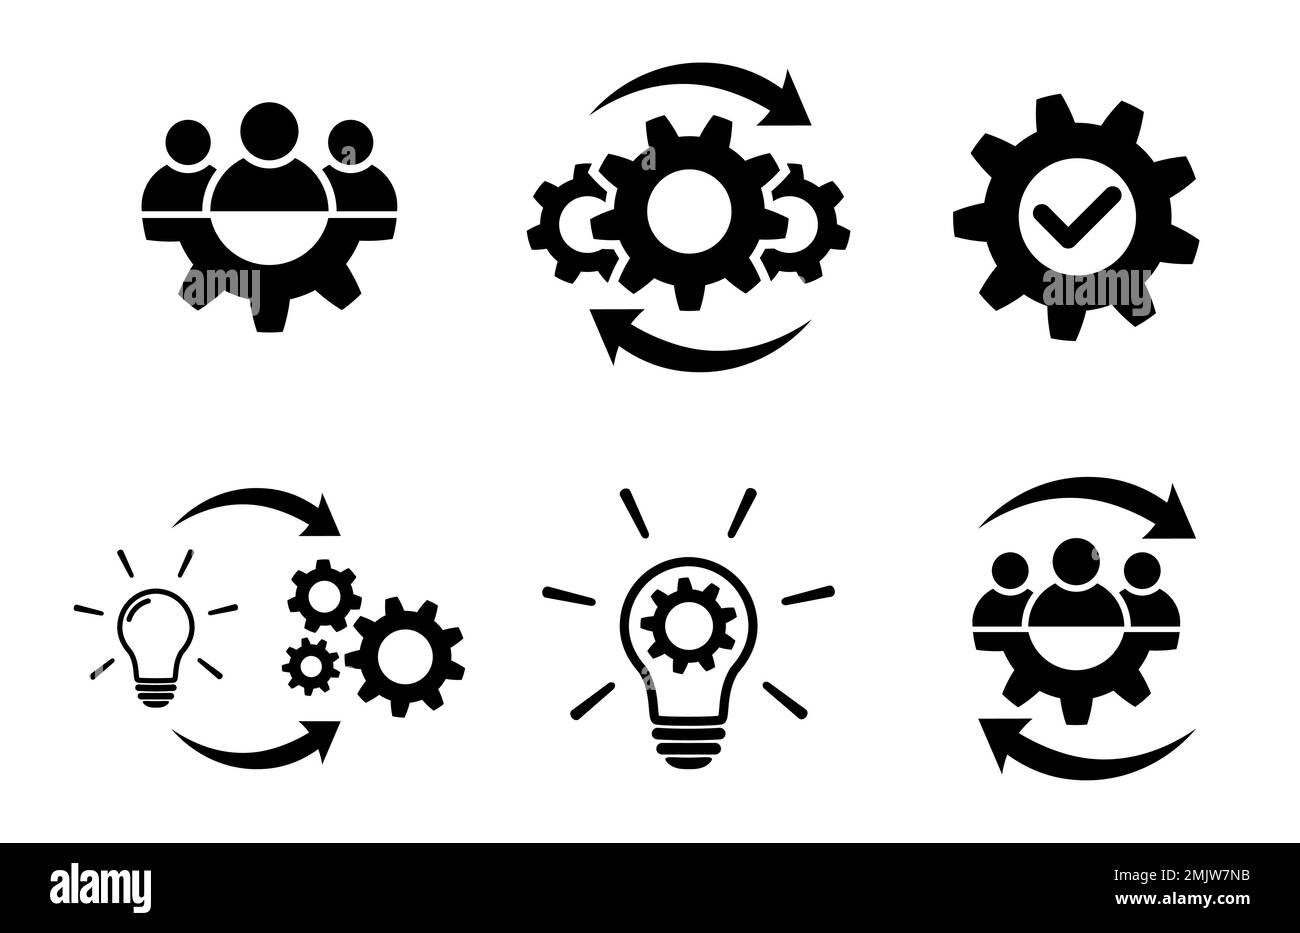 Teamwork and process icon set in flat tyle Stock Vector